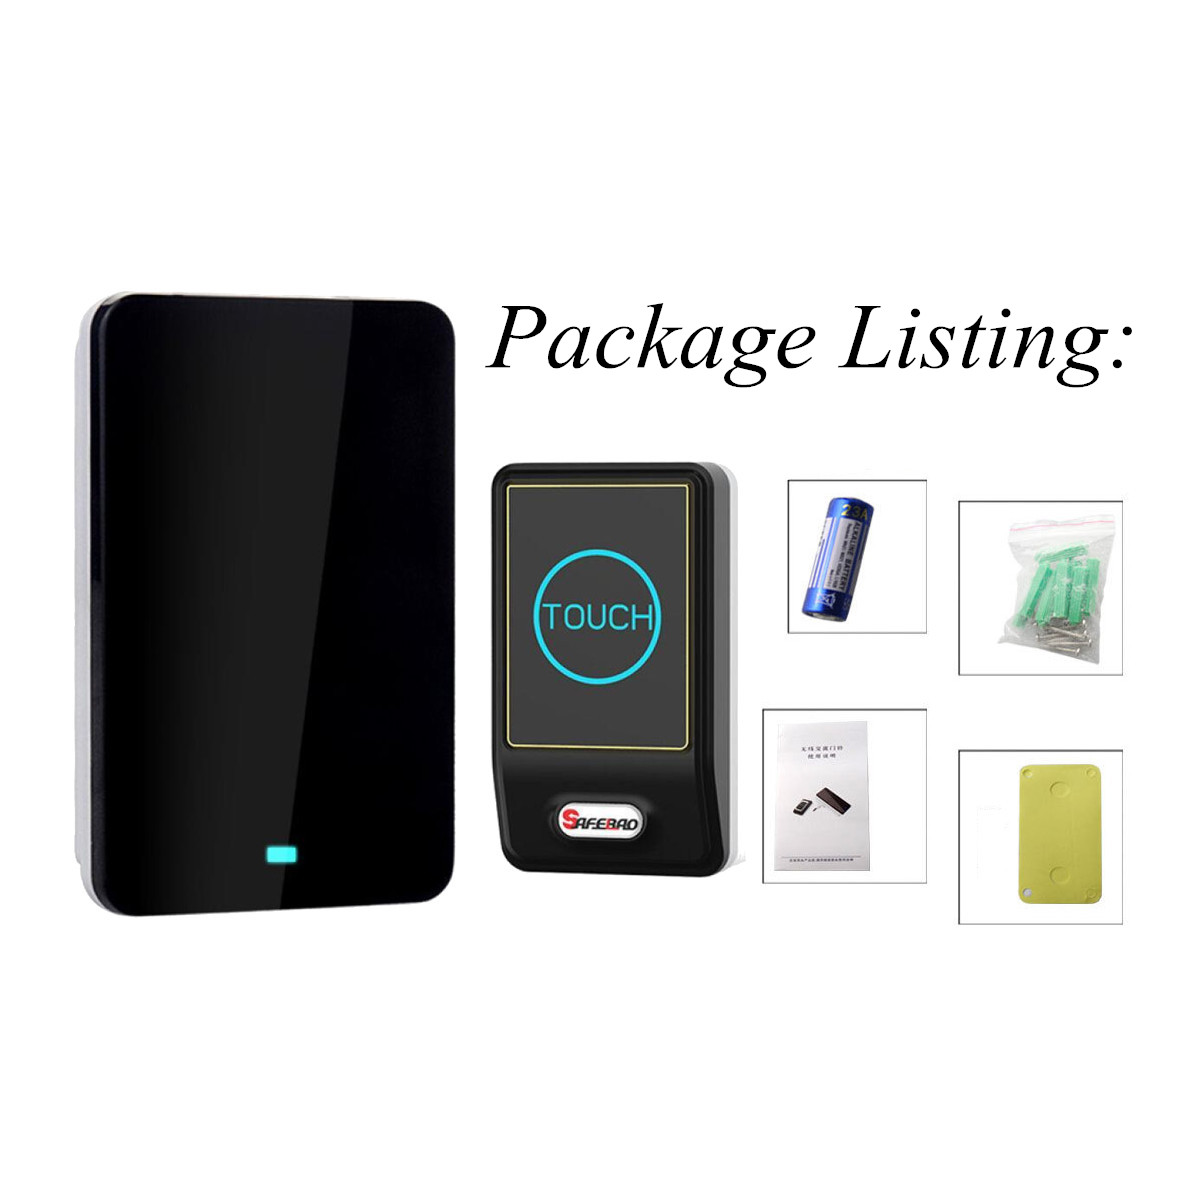 Waterproof-Home-Wireless-Doorbell-Touch-Gate-Security-Entry-Sensor-Front-Entry-1299319